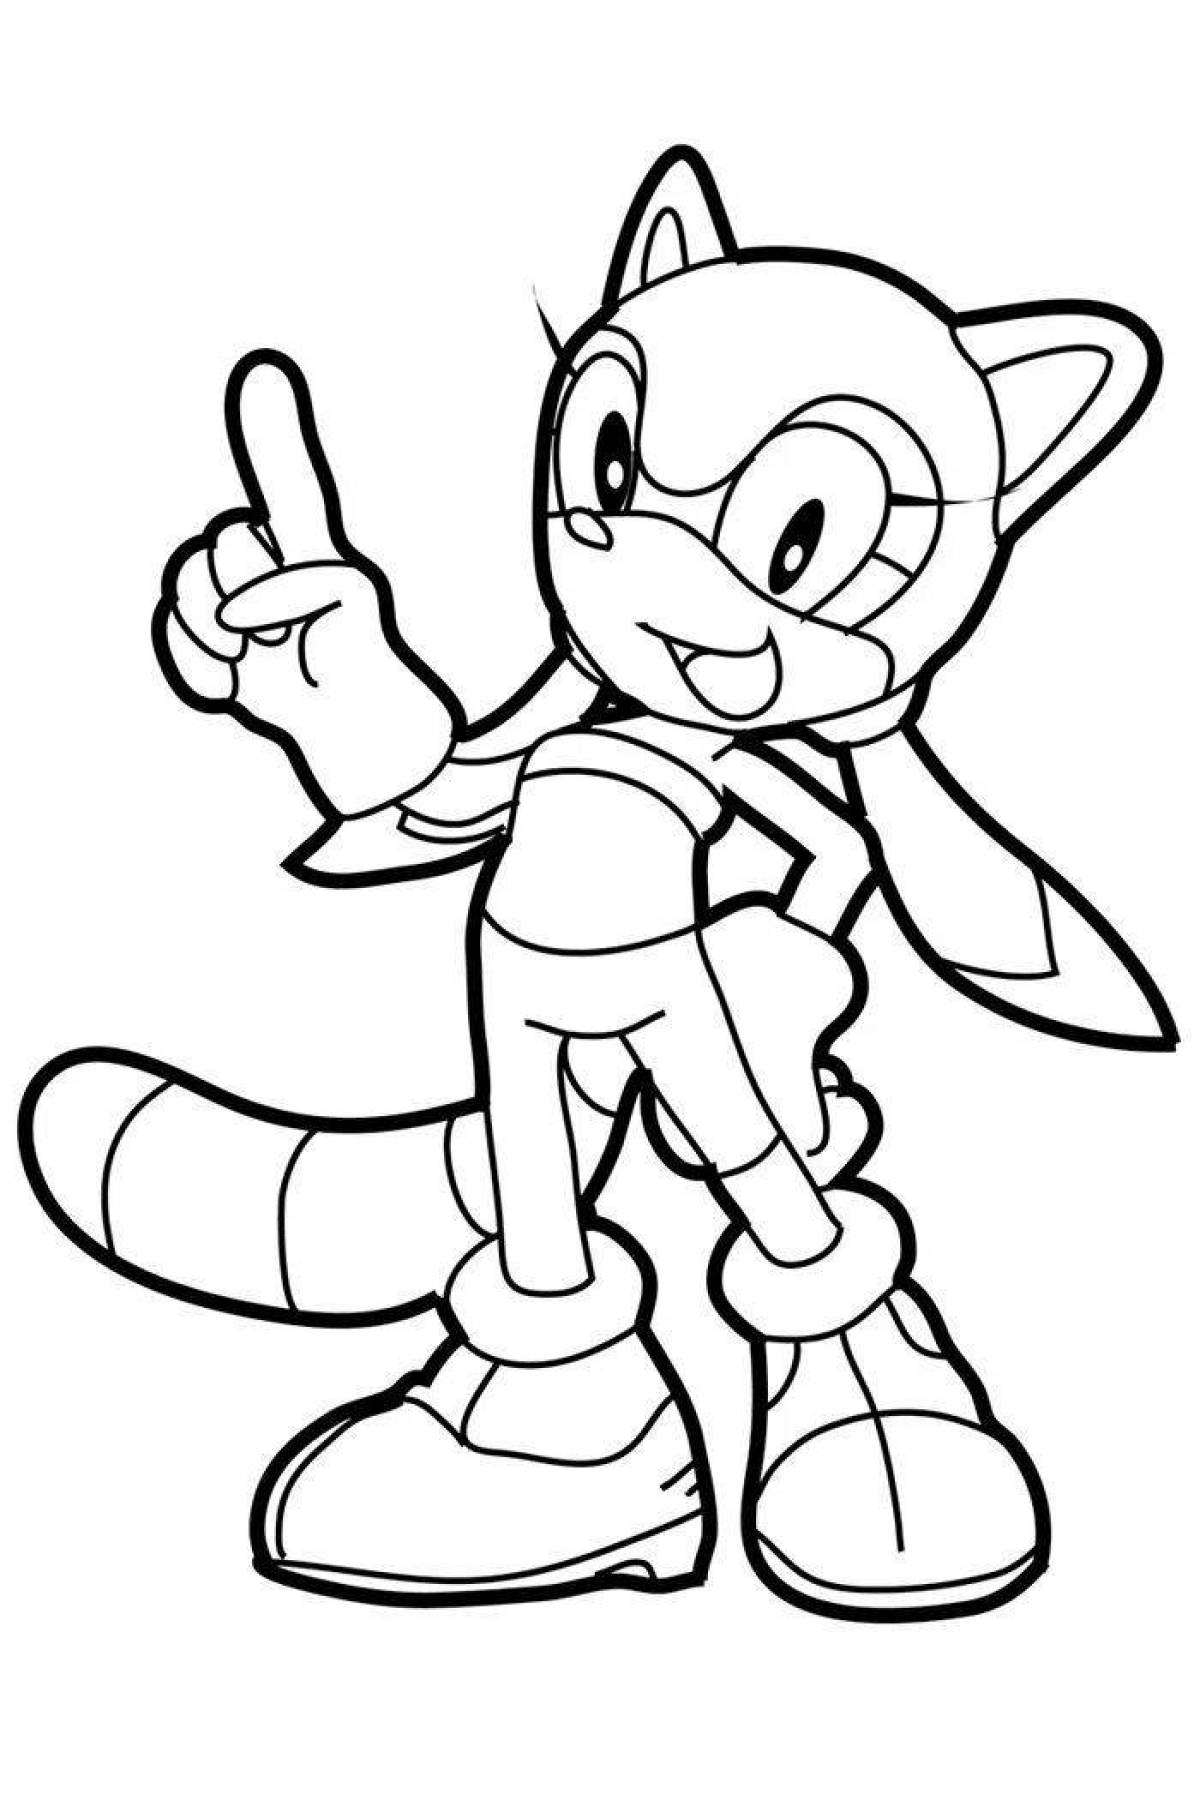 Glorious sonic heroes coloring book